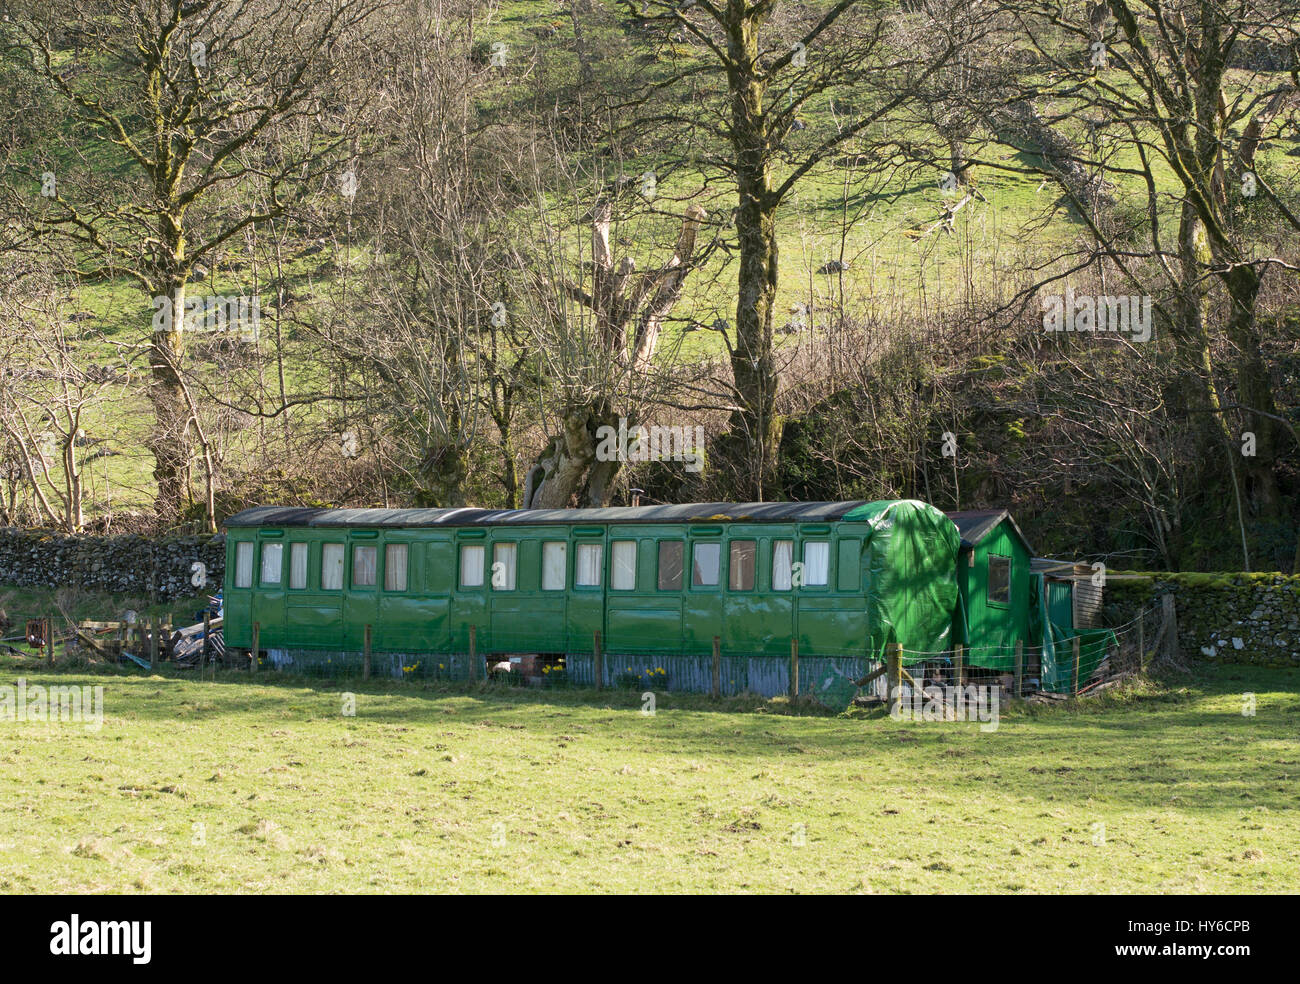 A vintage railway carriage used as a holiday home within a field. St John's in the Vale, Cumbria, England, UK Stock Photo